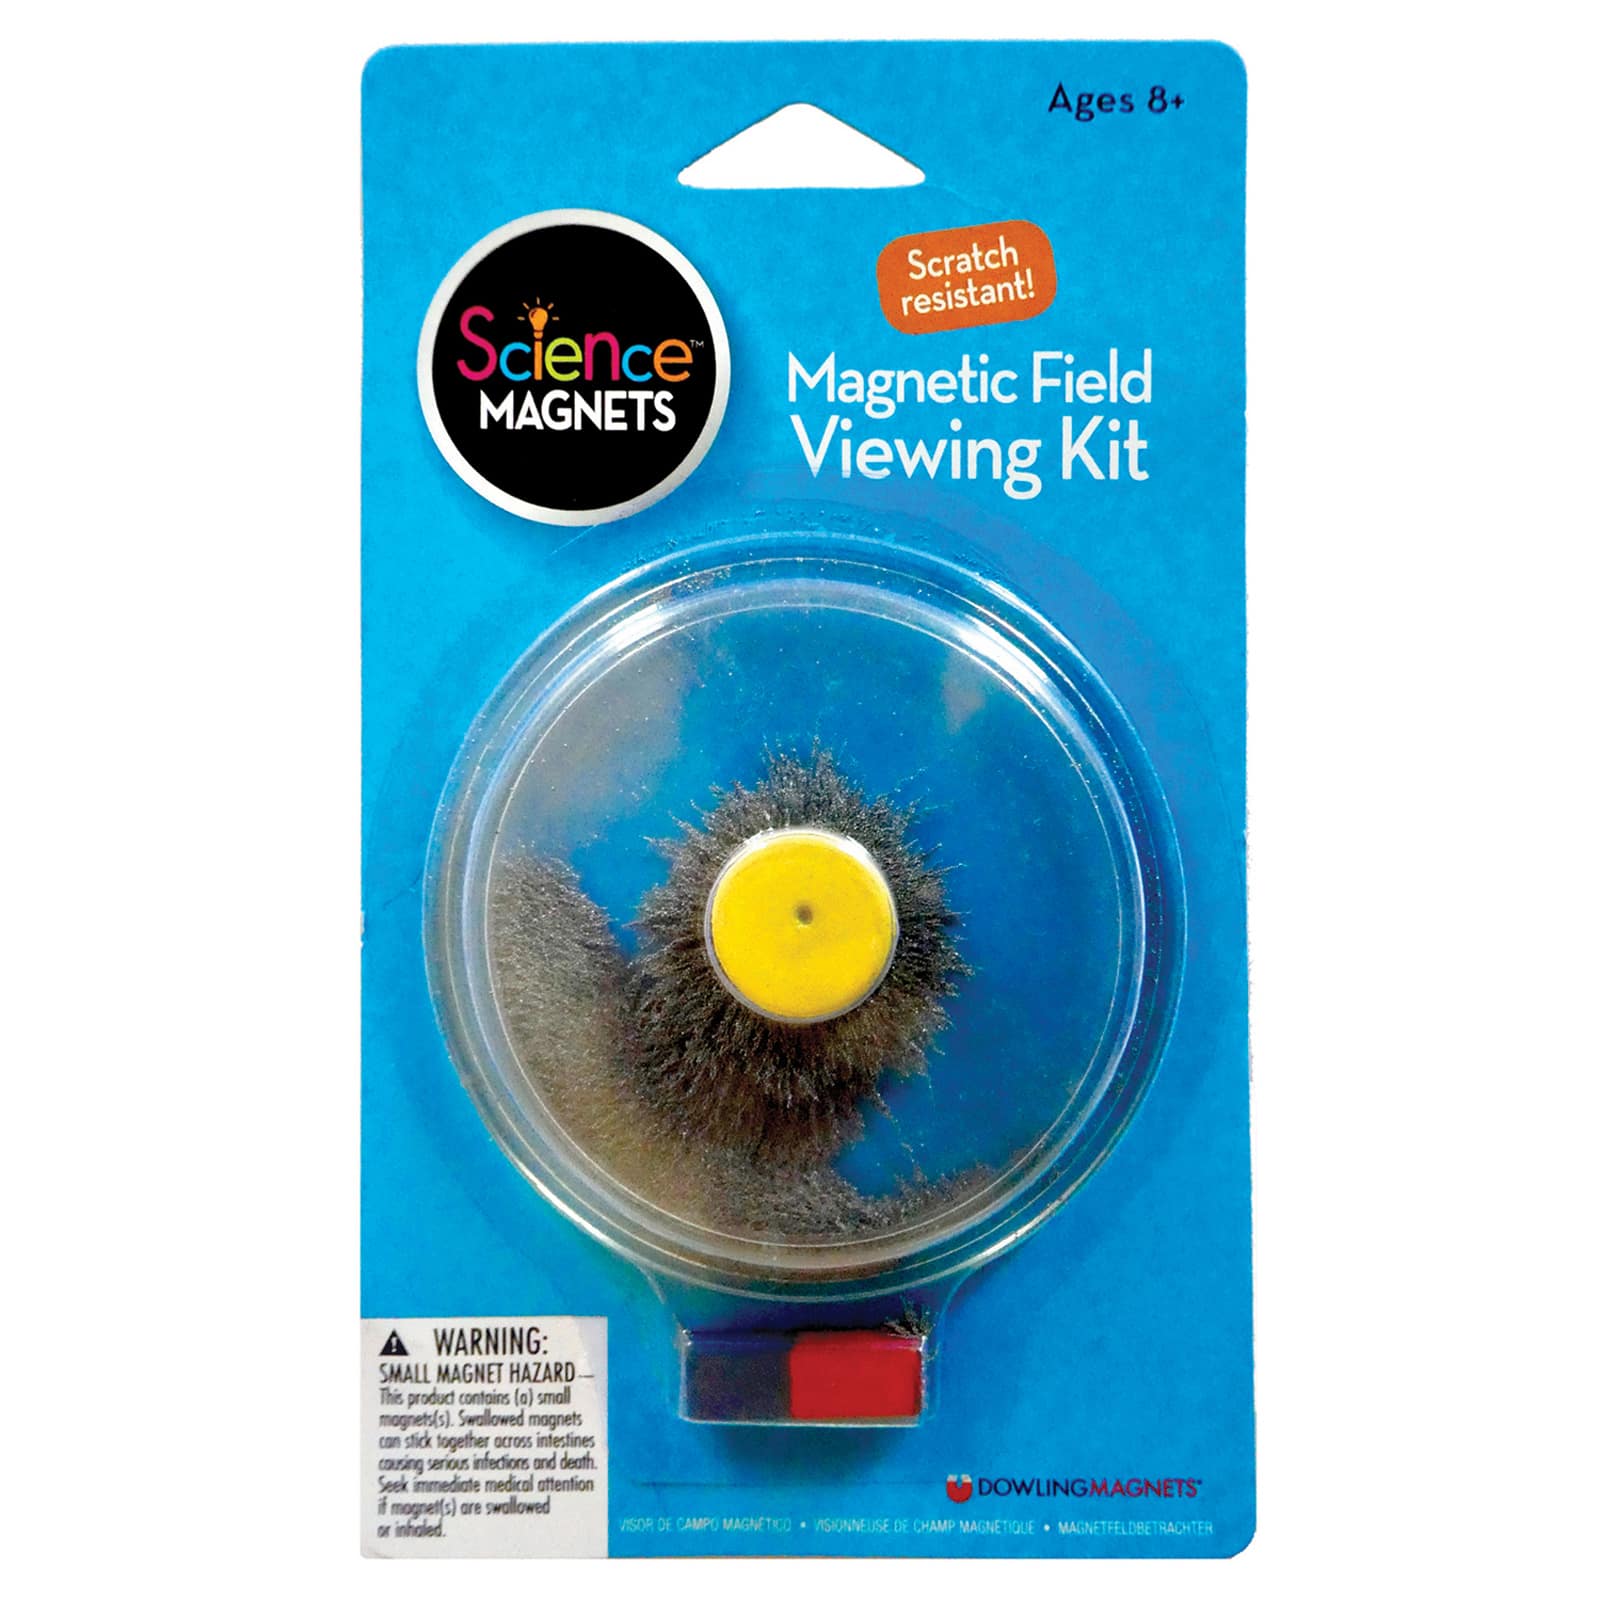 Magnetic Field Viewing Kit with Steel Filings